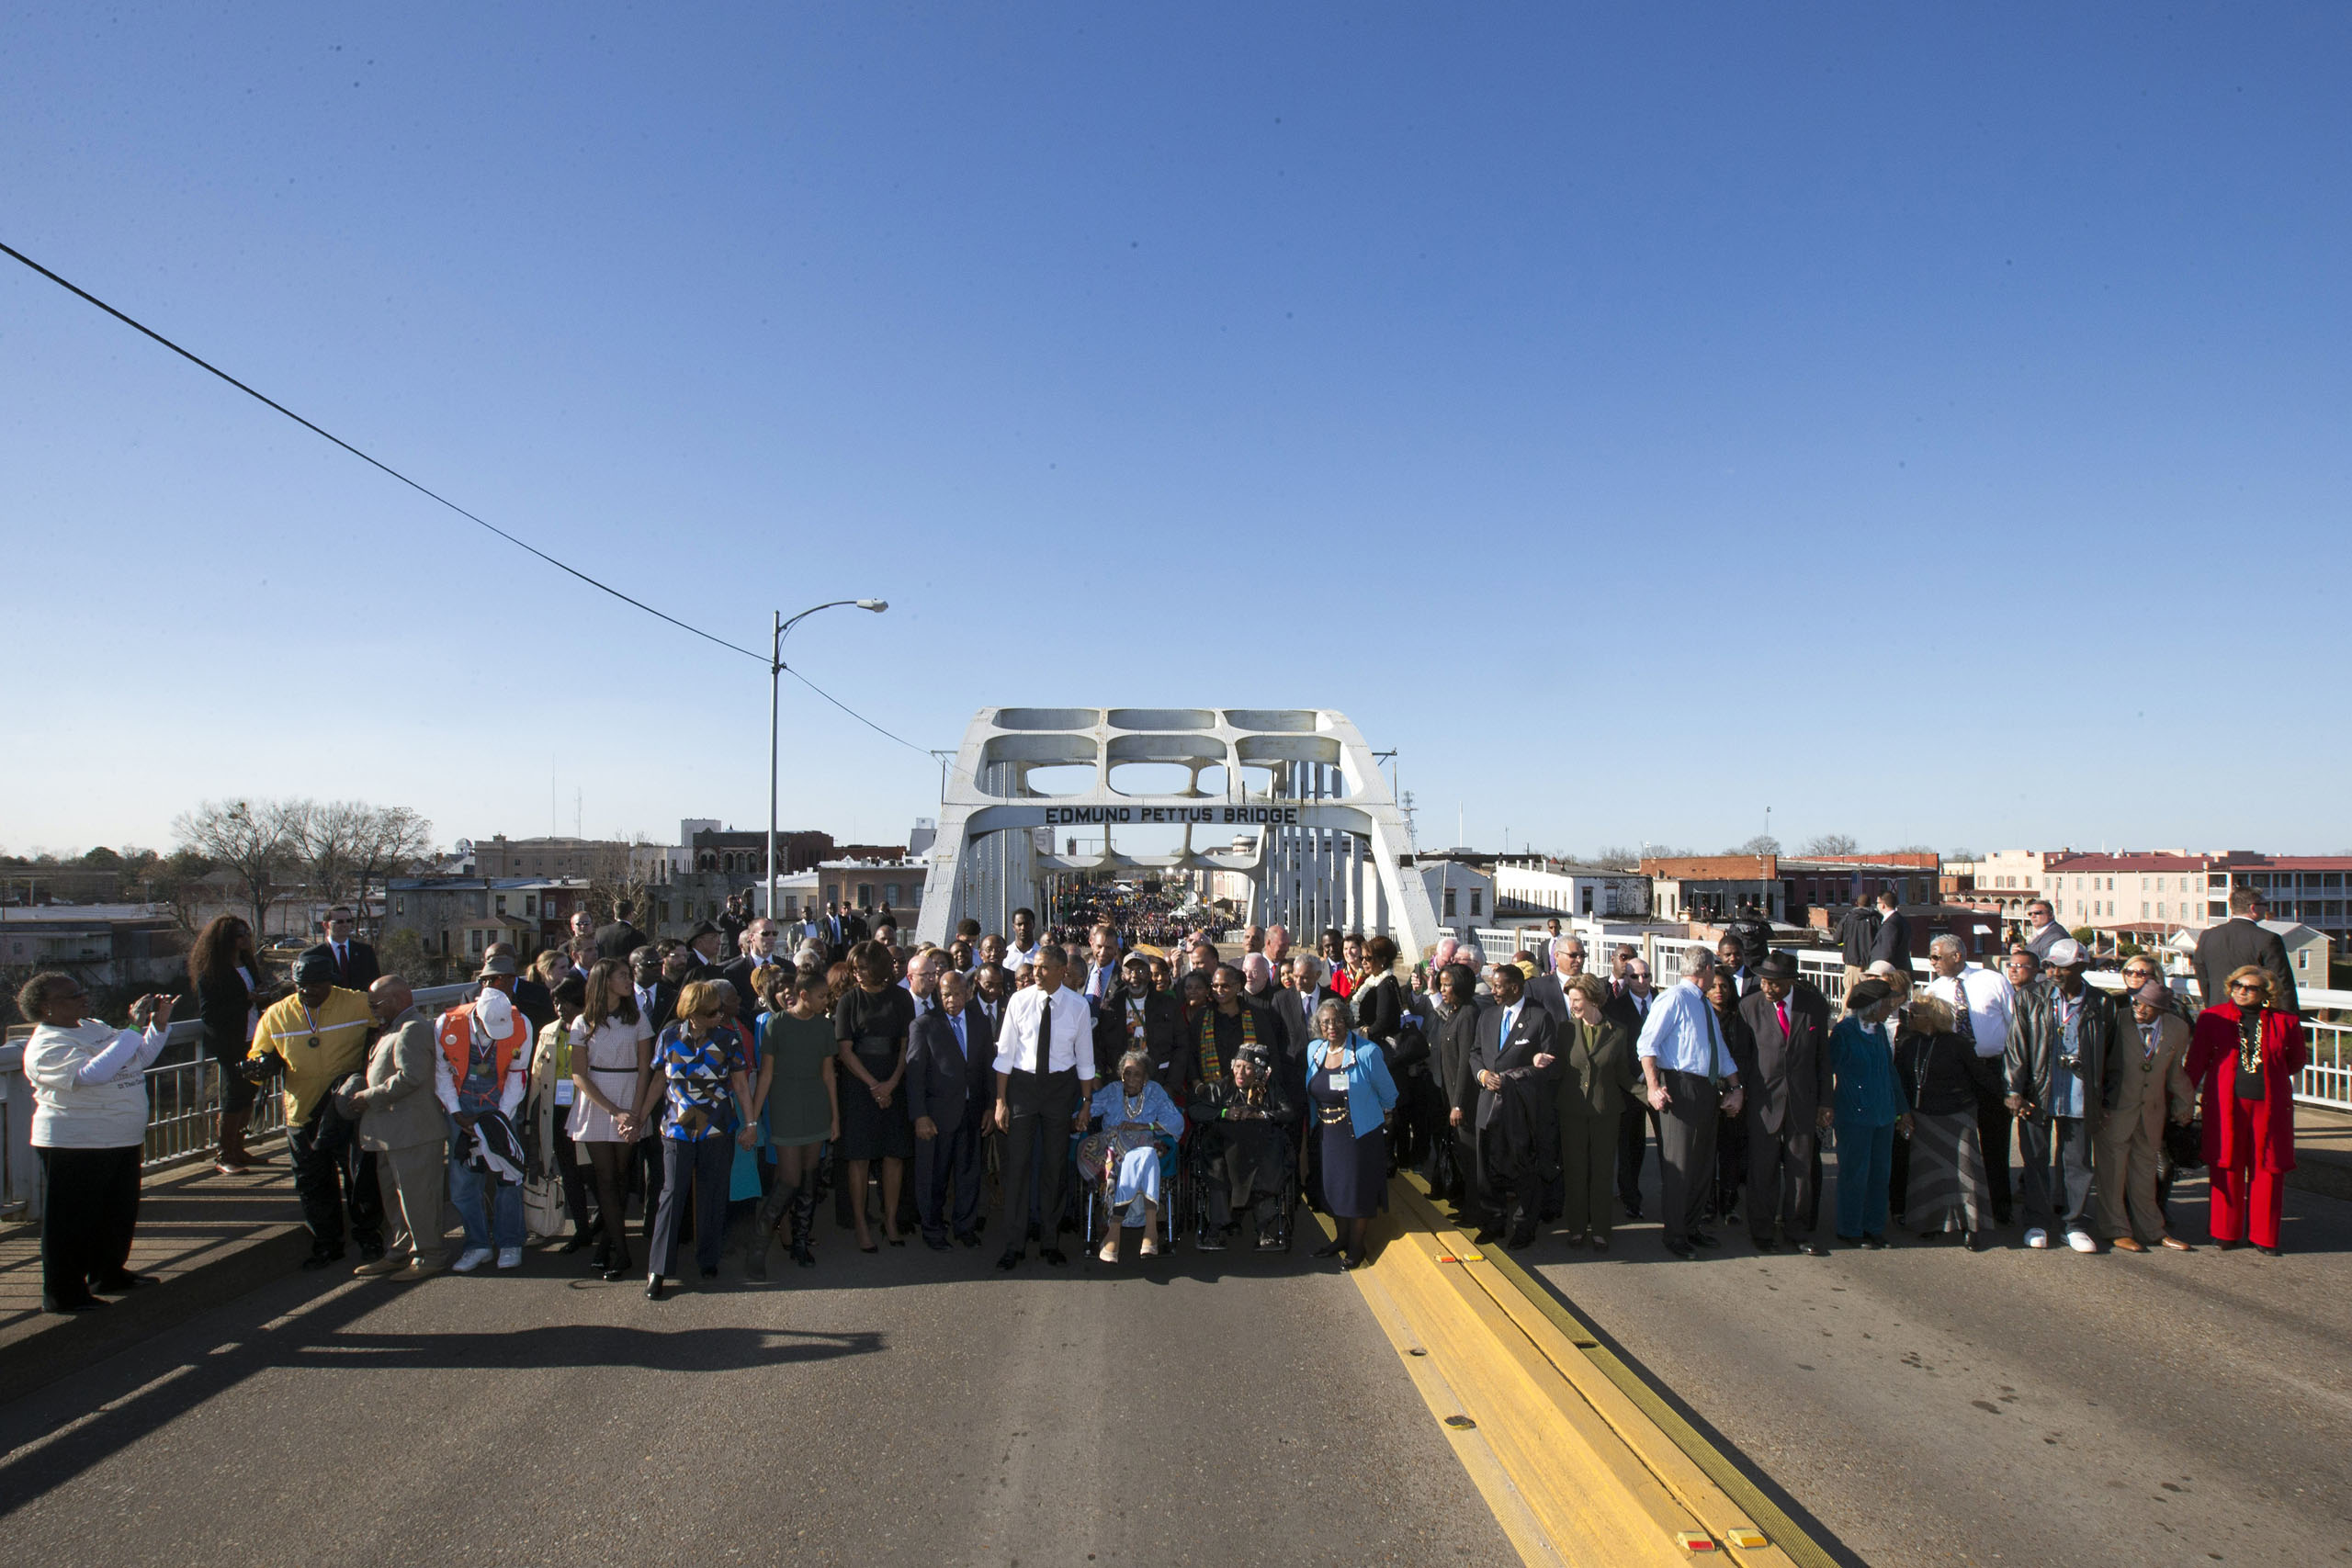 President Barack Obama, first lady Michelle Obama, their daughters Malia and Sasha, as well as members of Congress and civil rights leaders make a symbolic walk across the Edmund Pettus Bridge in Selma, Ala. on March 7, 2015. (Jacquelyn Martin—AP)